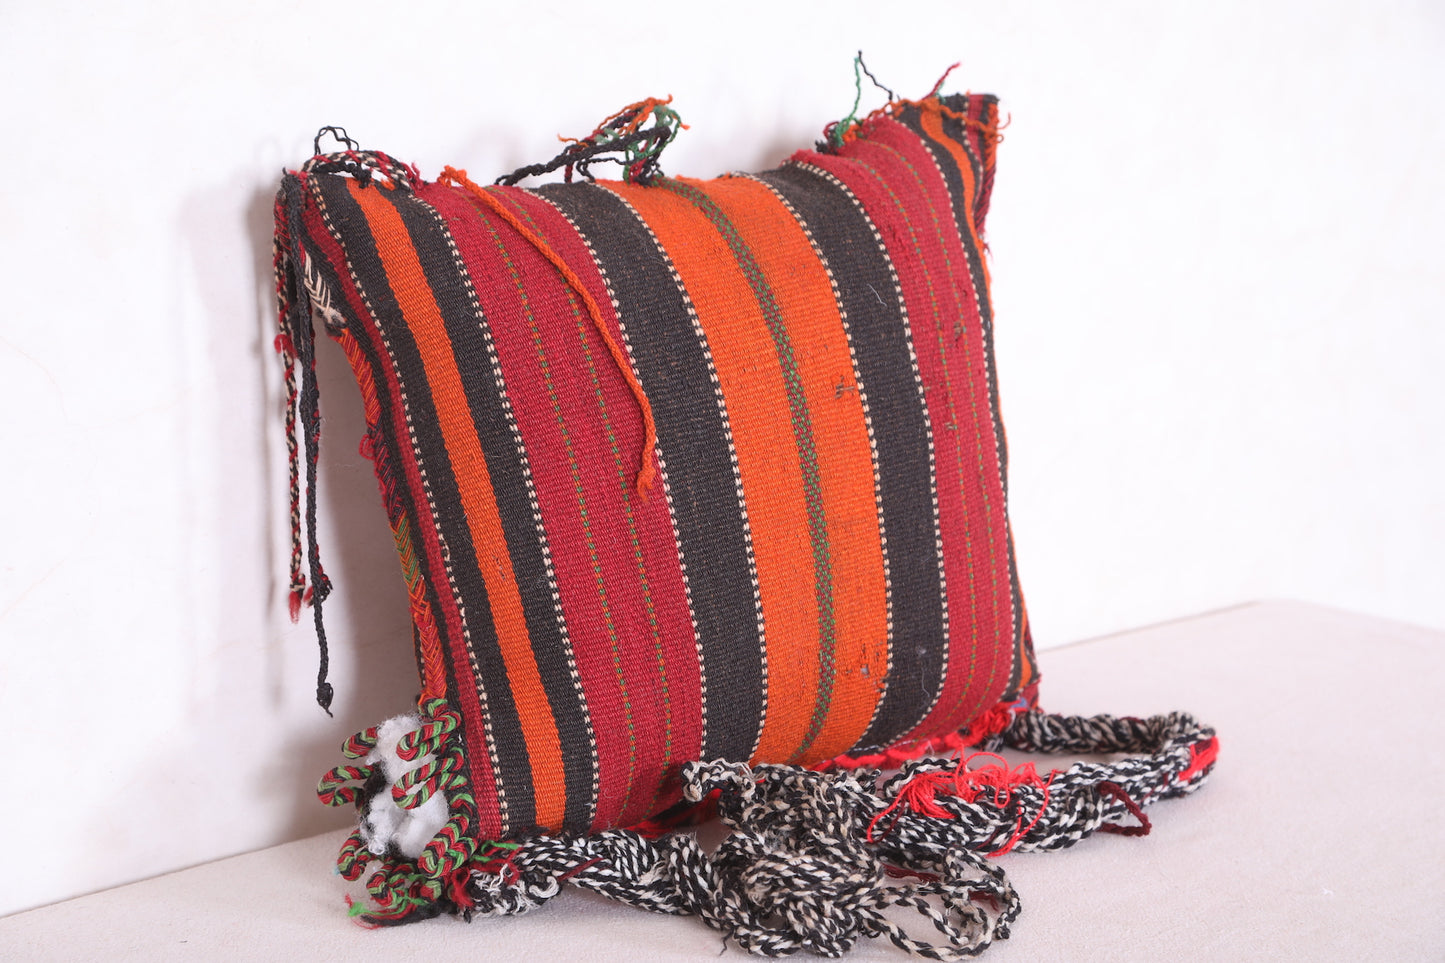 Striped berber pillow 14.1 INCHES X 15.7 INCHES